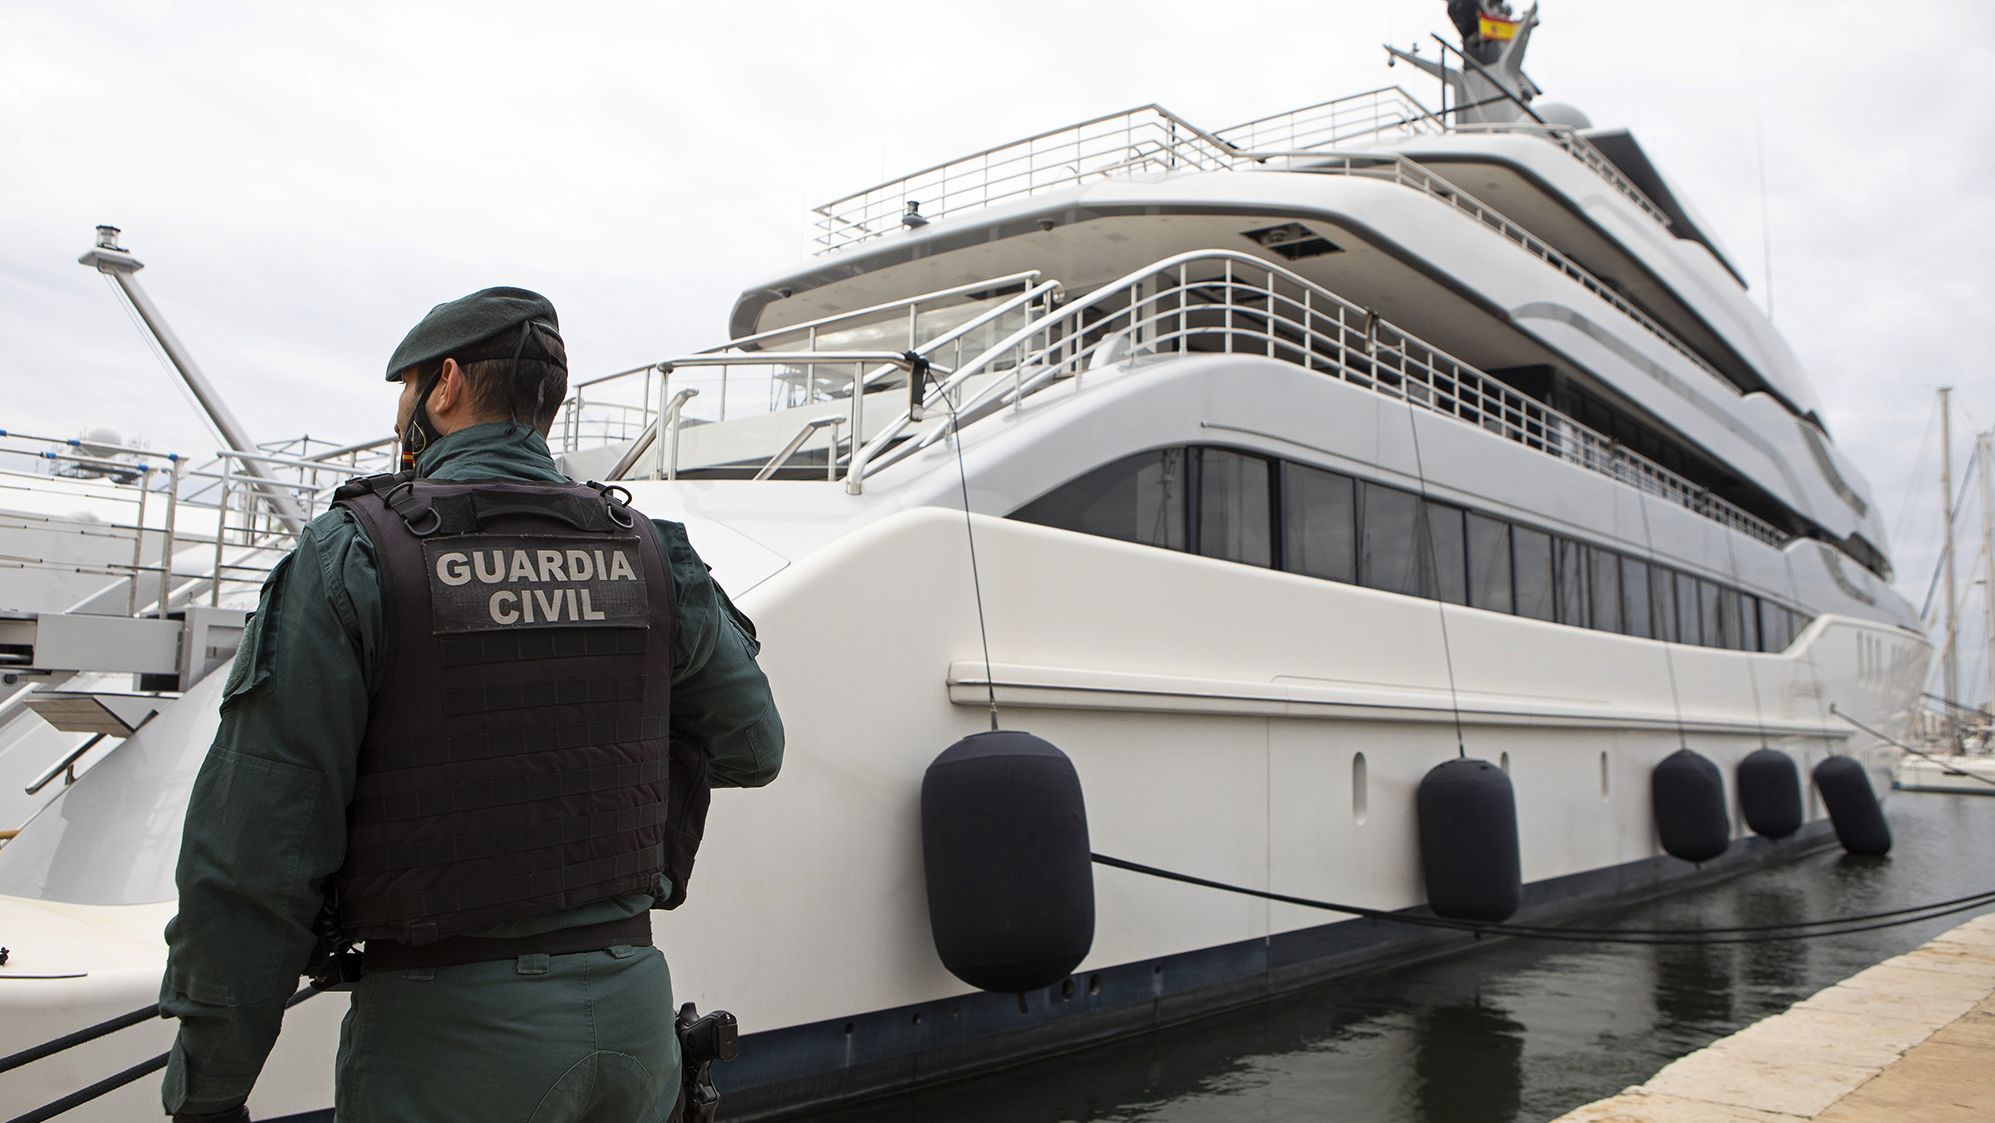 A Civil Guard stands by the yacht called Tango in Palma de Mallorca, Spain, Monday April 4, 2022.